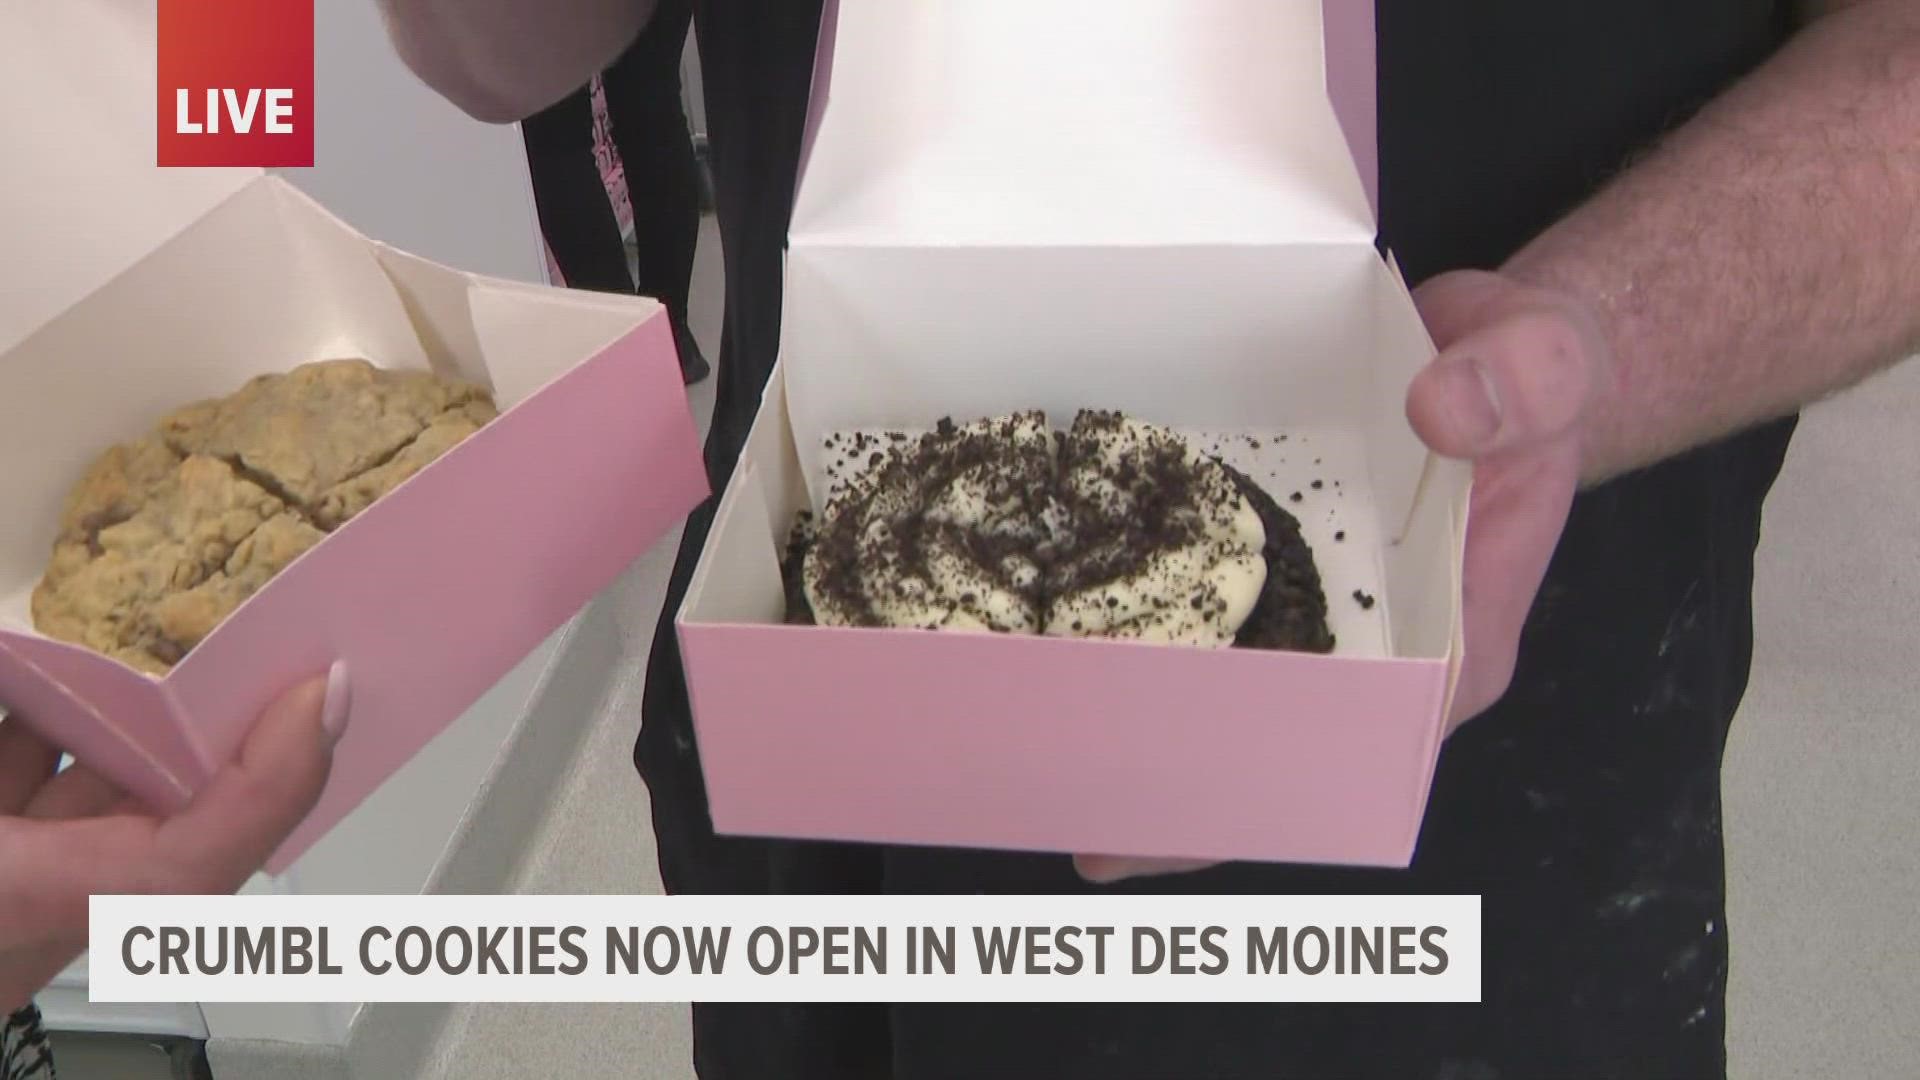 The store, which is located in suite 140 at 5585 Mills Civic Pkwy in West Des Moines, will be serving up sweet treats starting at 8 a.m. Monday-Saturday.